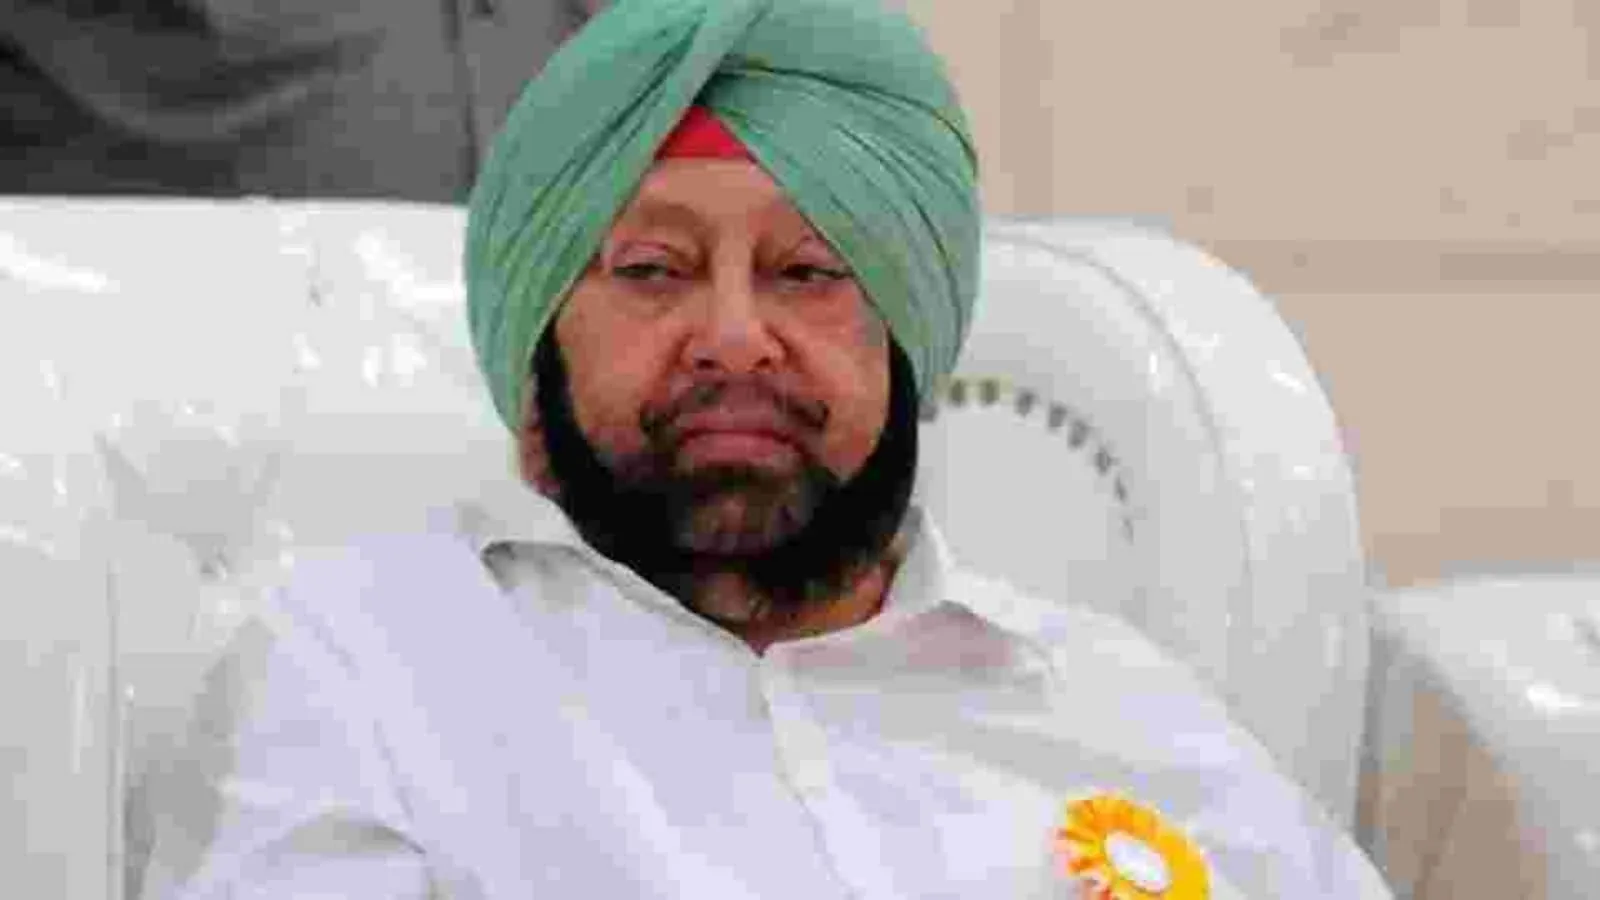 From June 1 onwards, COVID-19 vaccination priority list for 18-45 age group in Punjab will be expanded, Captain Amarinder Singh announced.